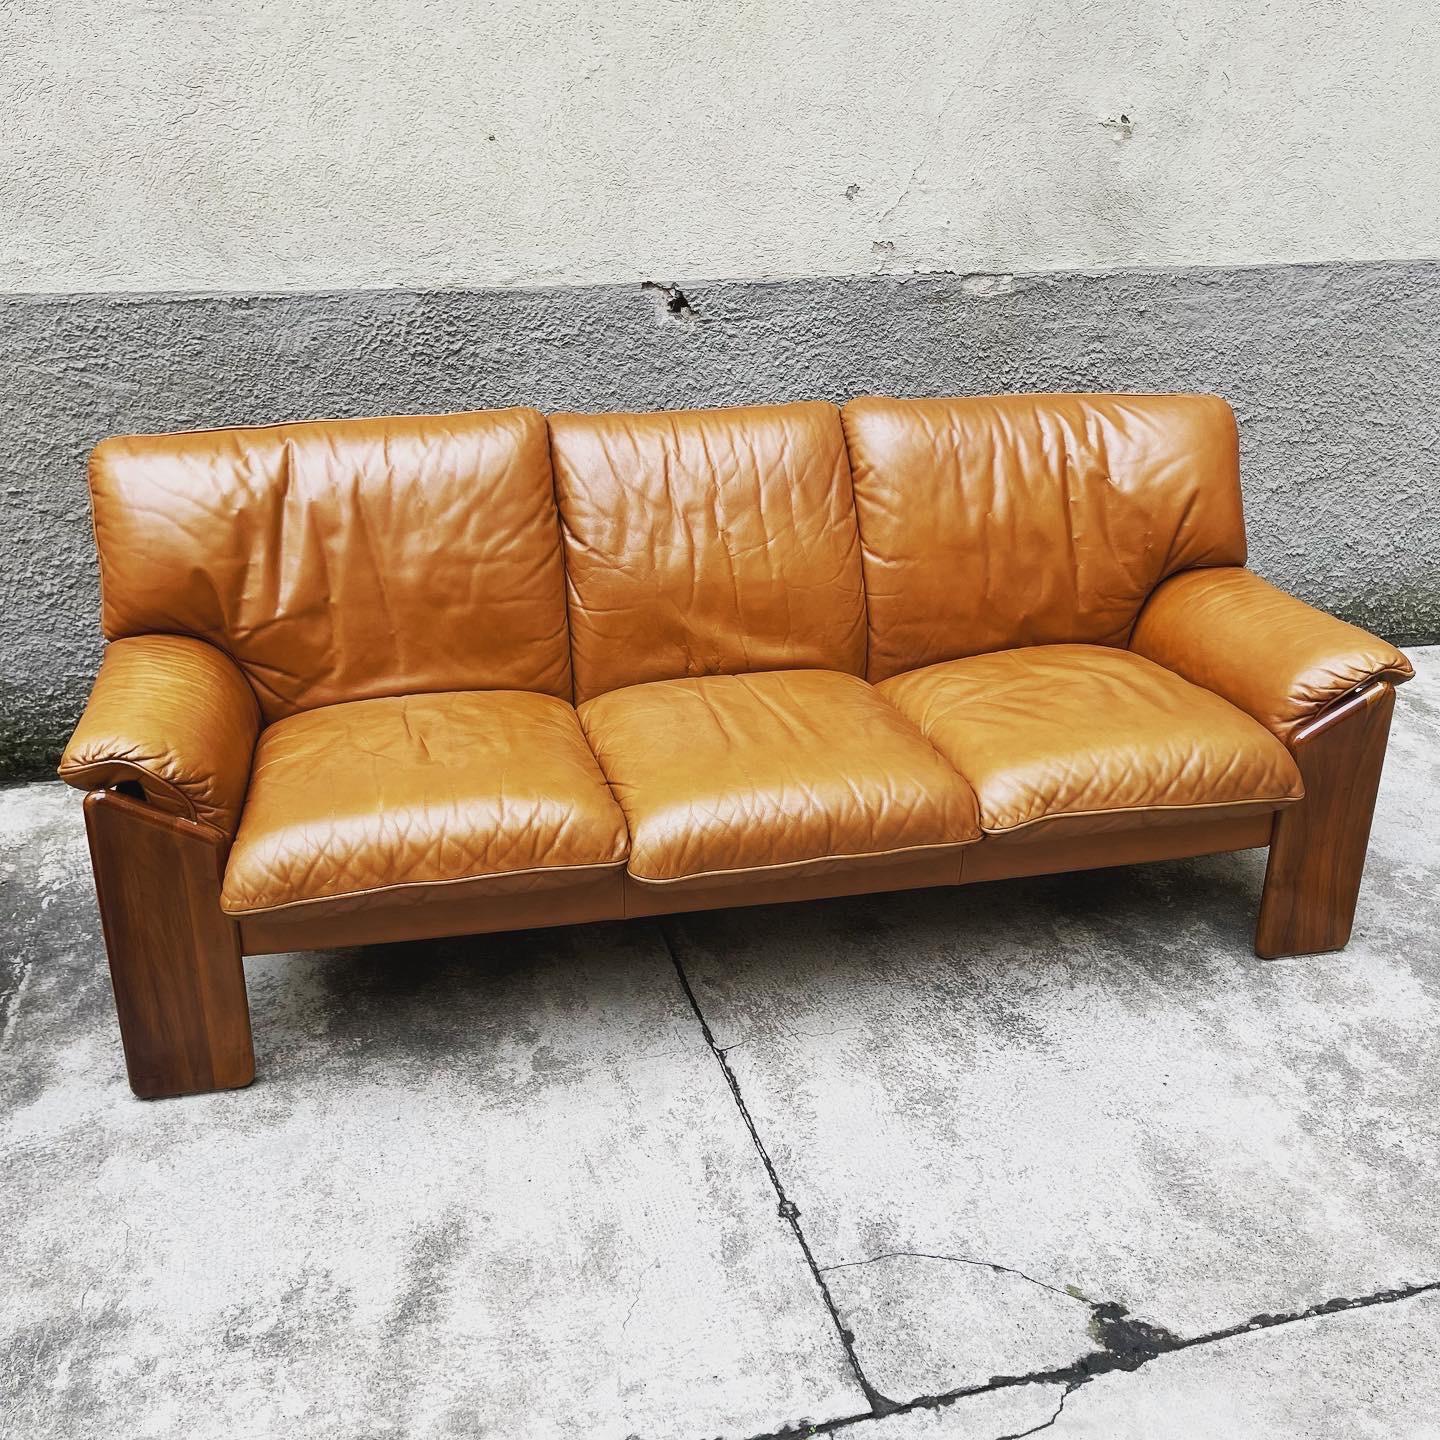 A walnut and leather sofa from the Sapporo Line, designed by Mario Marenco for Mobil Girgi, produced in the 1970s, Italy. Marked under the pillows. Beautifully designed with angled front legs that extend to the sides and back, the back support is